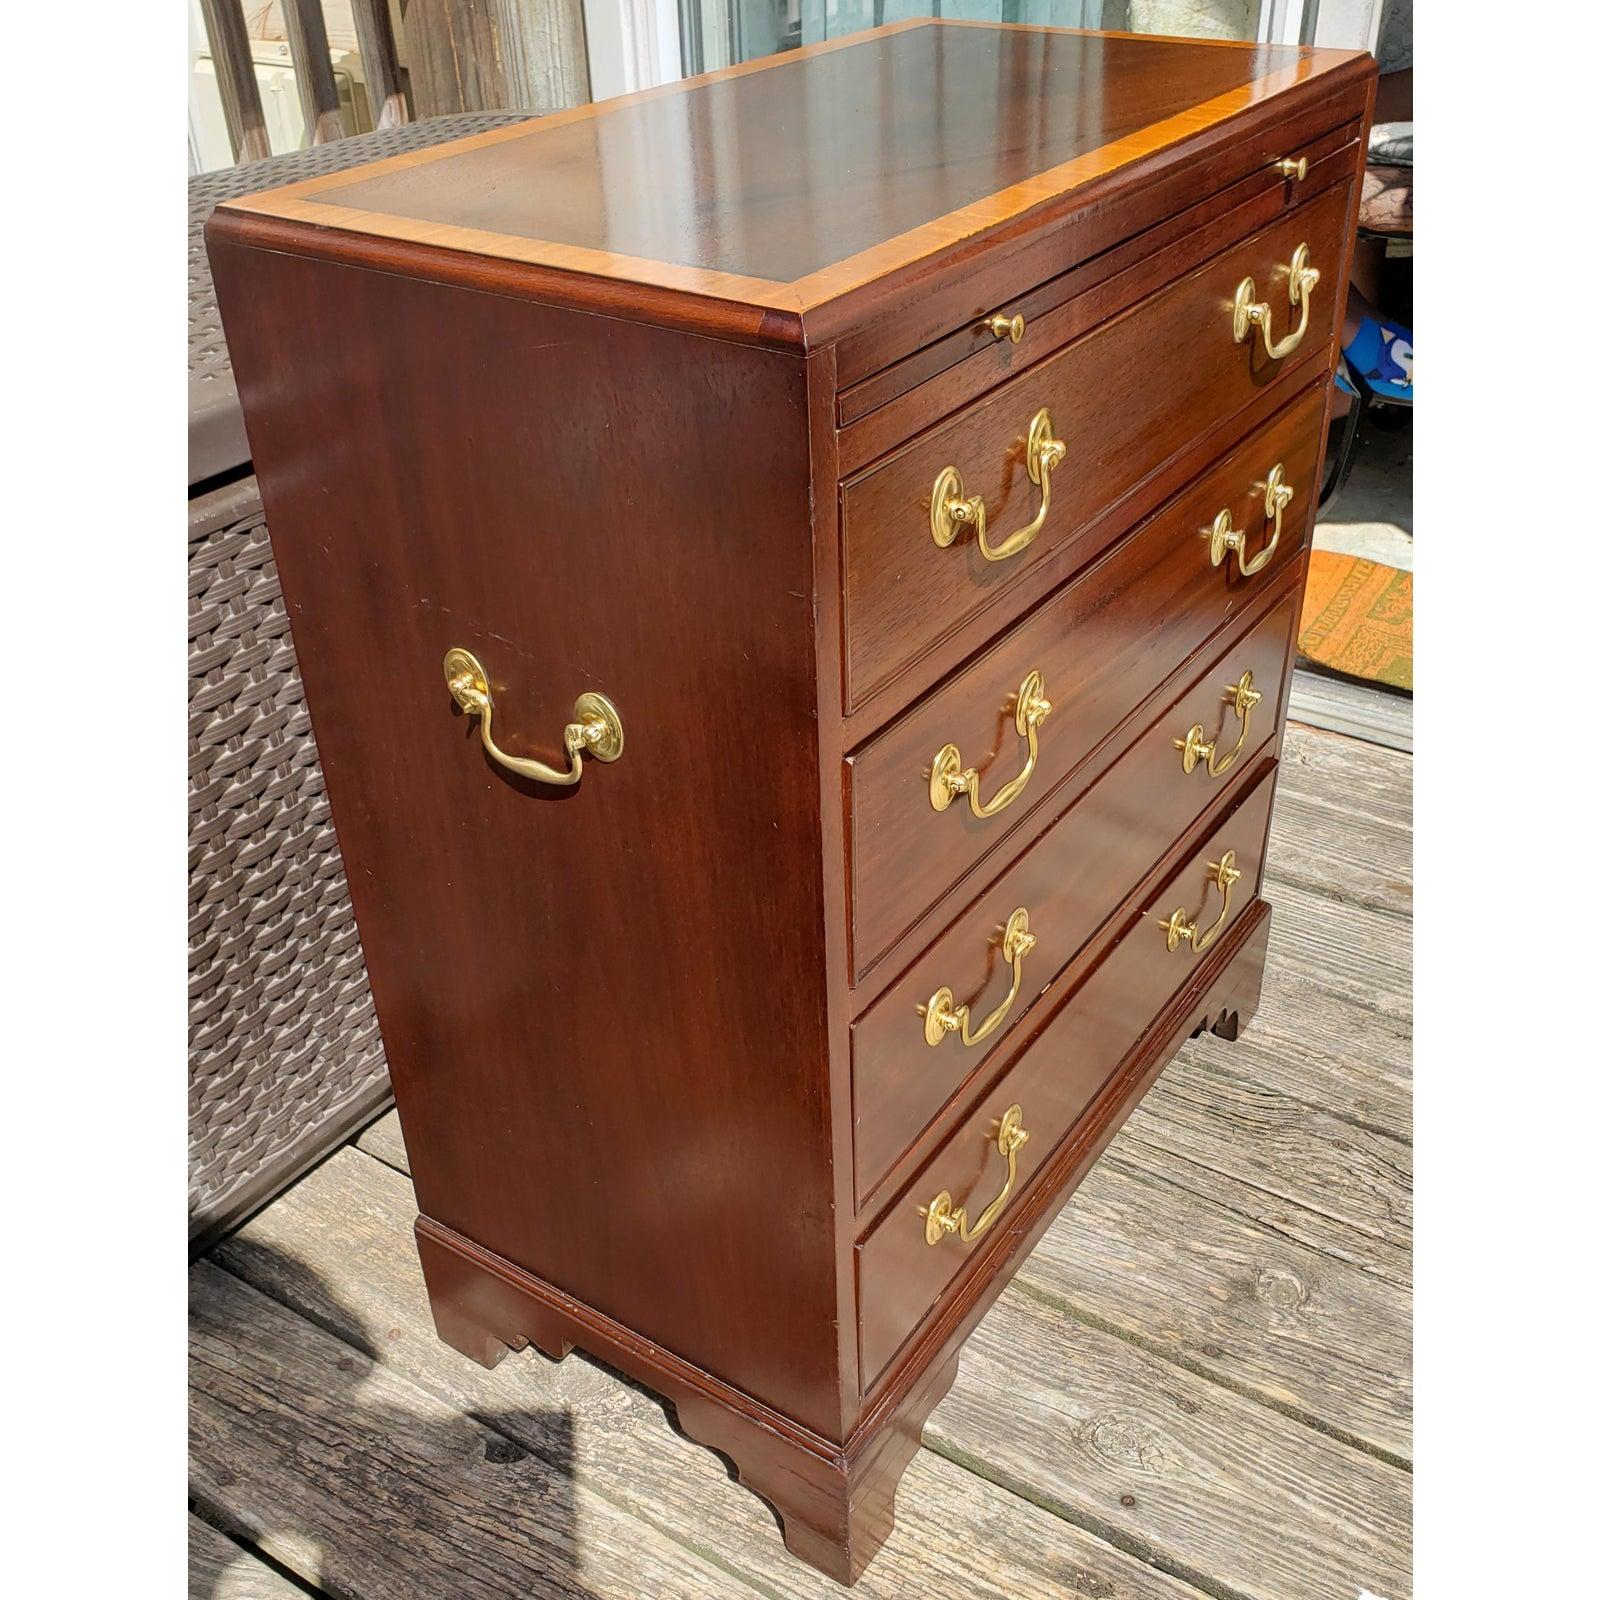 Solid mahogany construction with satinwood inlay top. Pull out tray to make it a secretary desk. Versatile piece that can be used in any room in your home. Dovetailed Drawer Construction. High Quality Construction.
18 C. Design
Chippendale